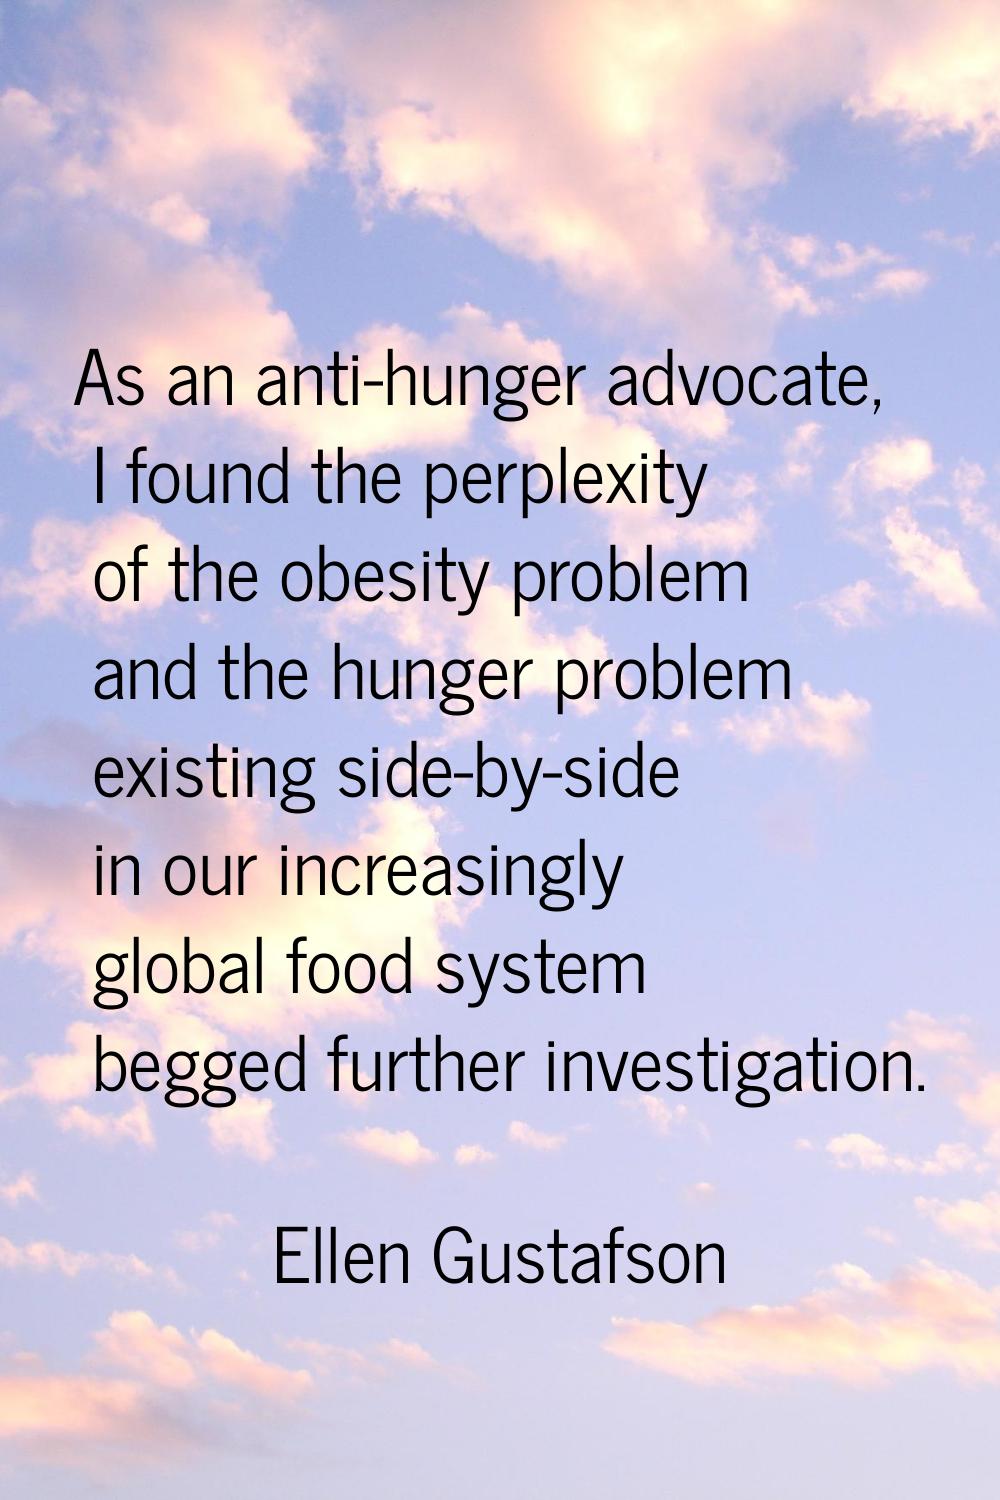 As an anti-hunger advocate, I found the perplexity of the obesity problem and the hunger problem ex